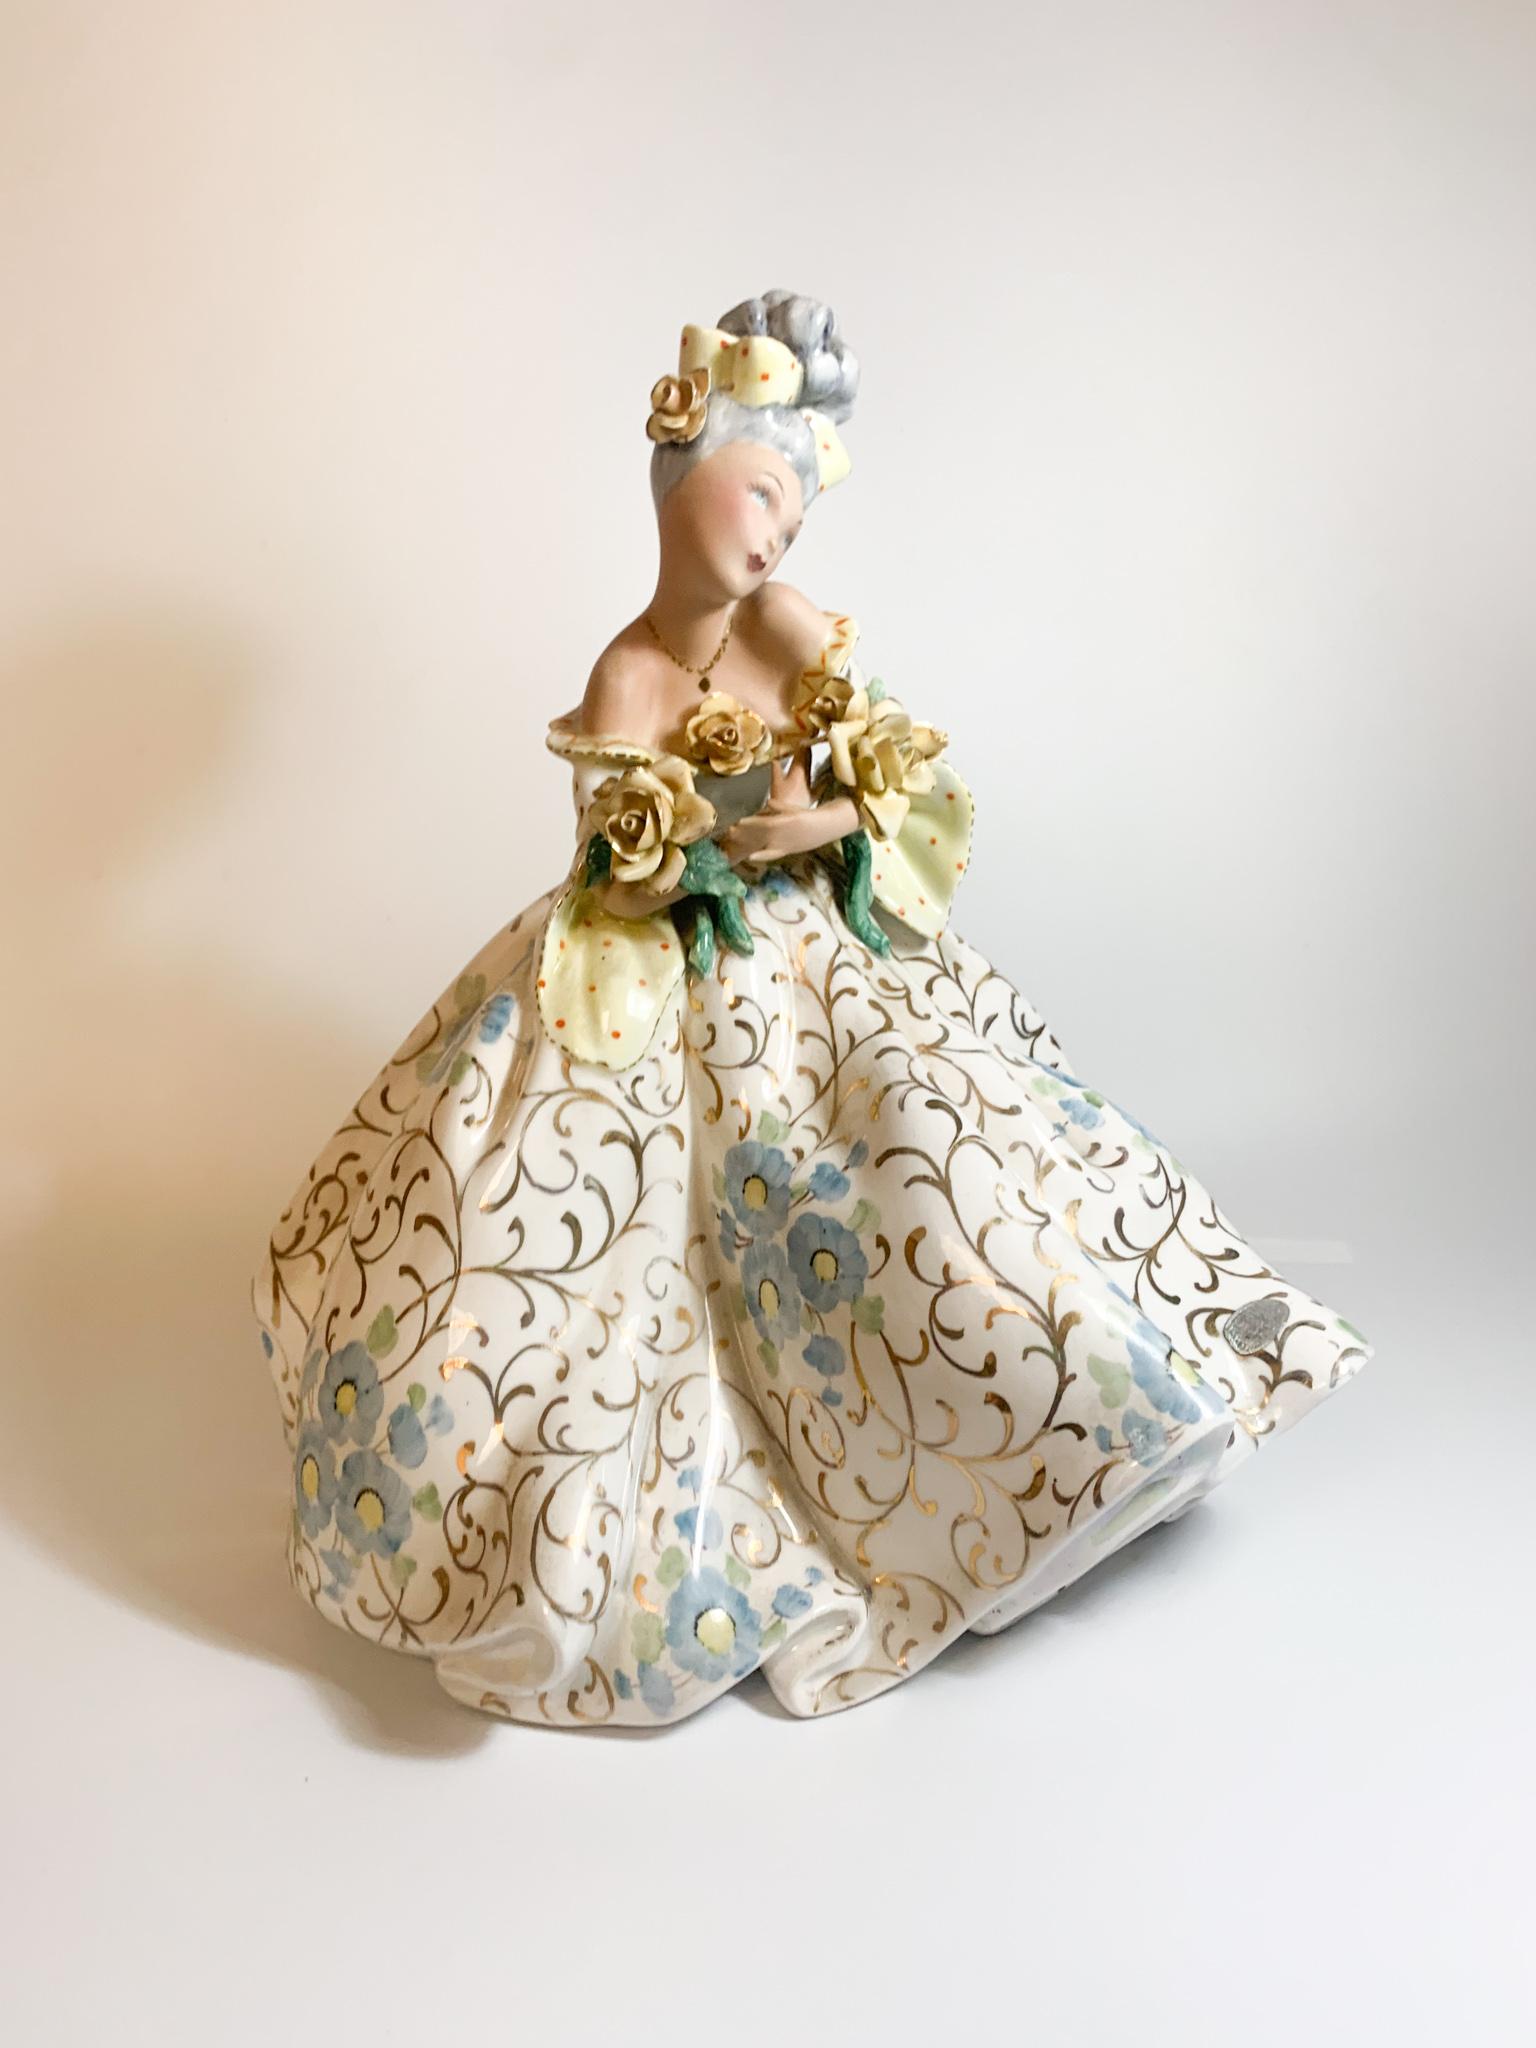 Italian ceramic sculpture of a lady with flowered dress, made by Tiziano Galli in the 1950s. The pleats of the skirt have been made in iridescence.

Ø 24 cm Ø 27 cm h 30 cm